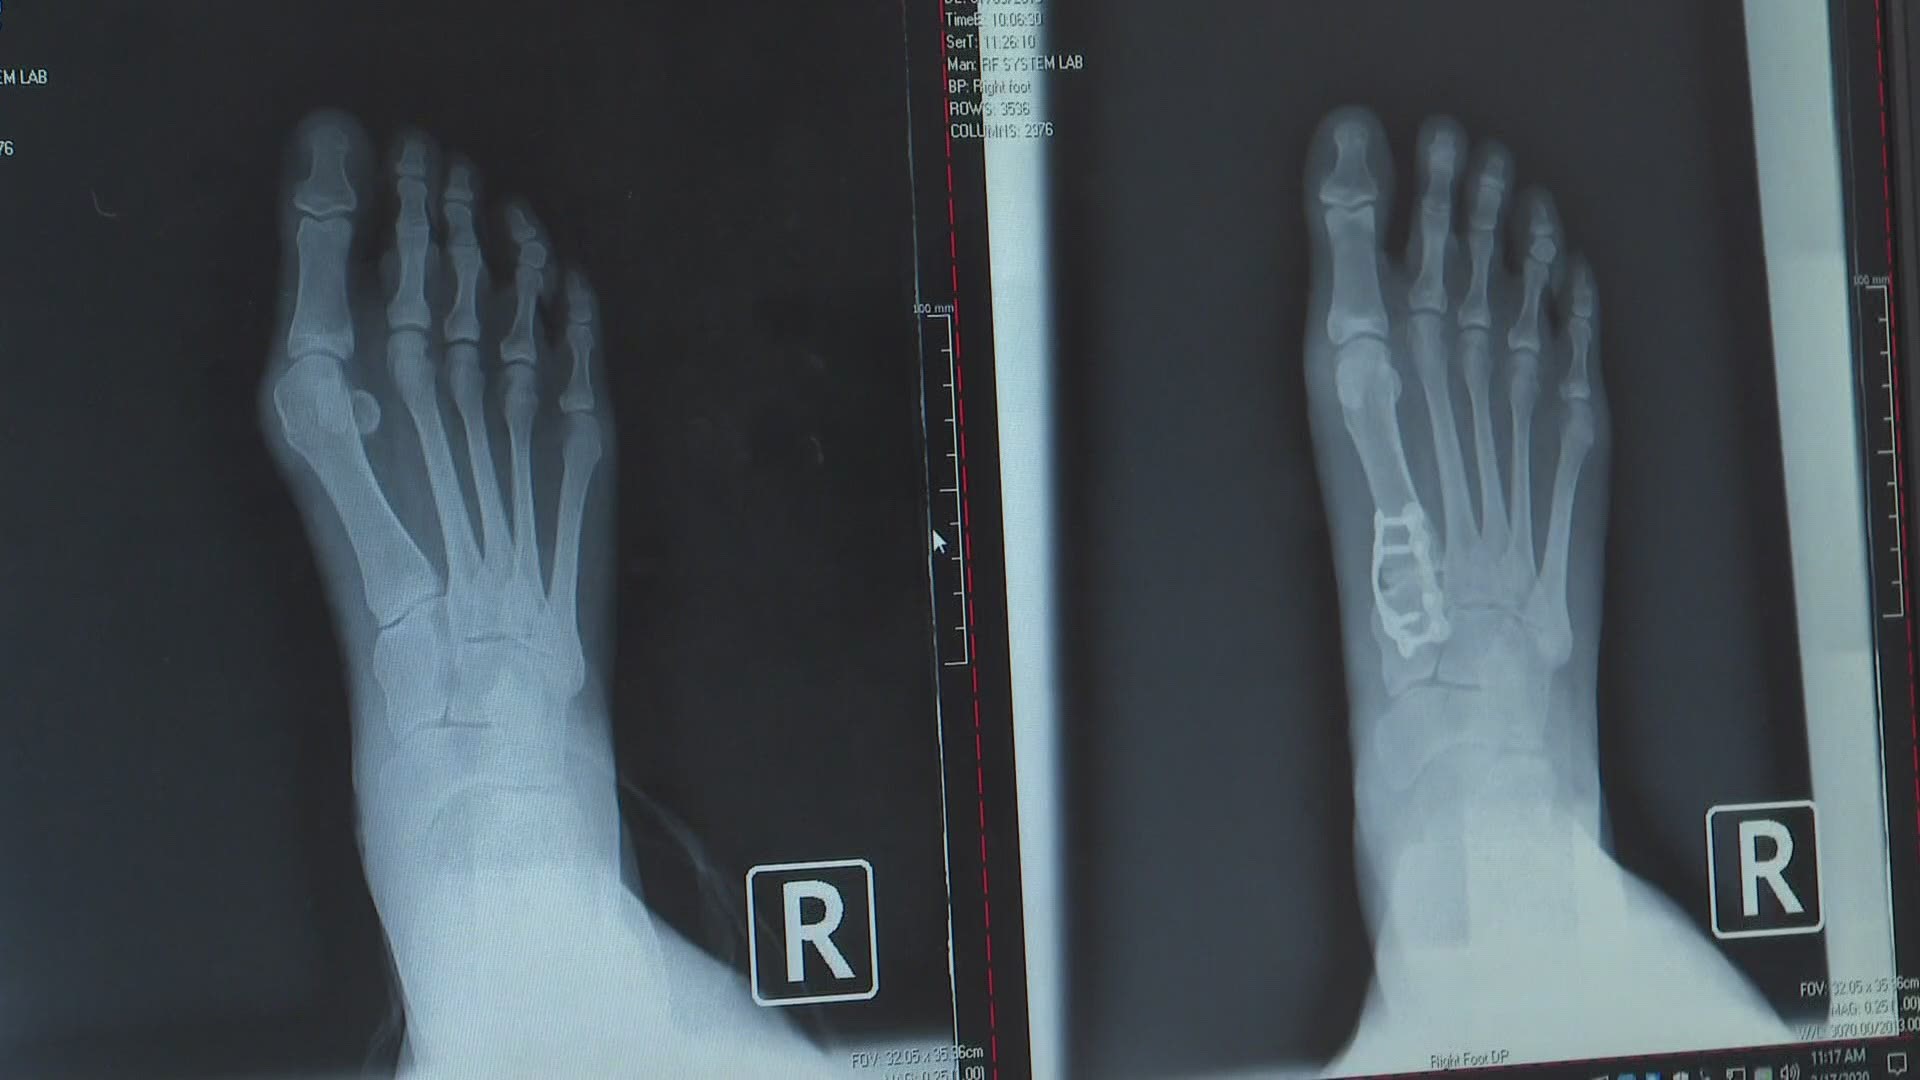 Less invasive bunion surgery brings relief to some patients